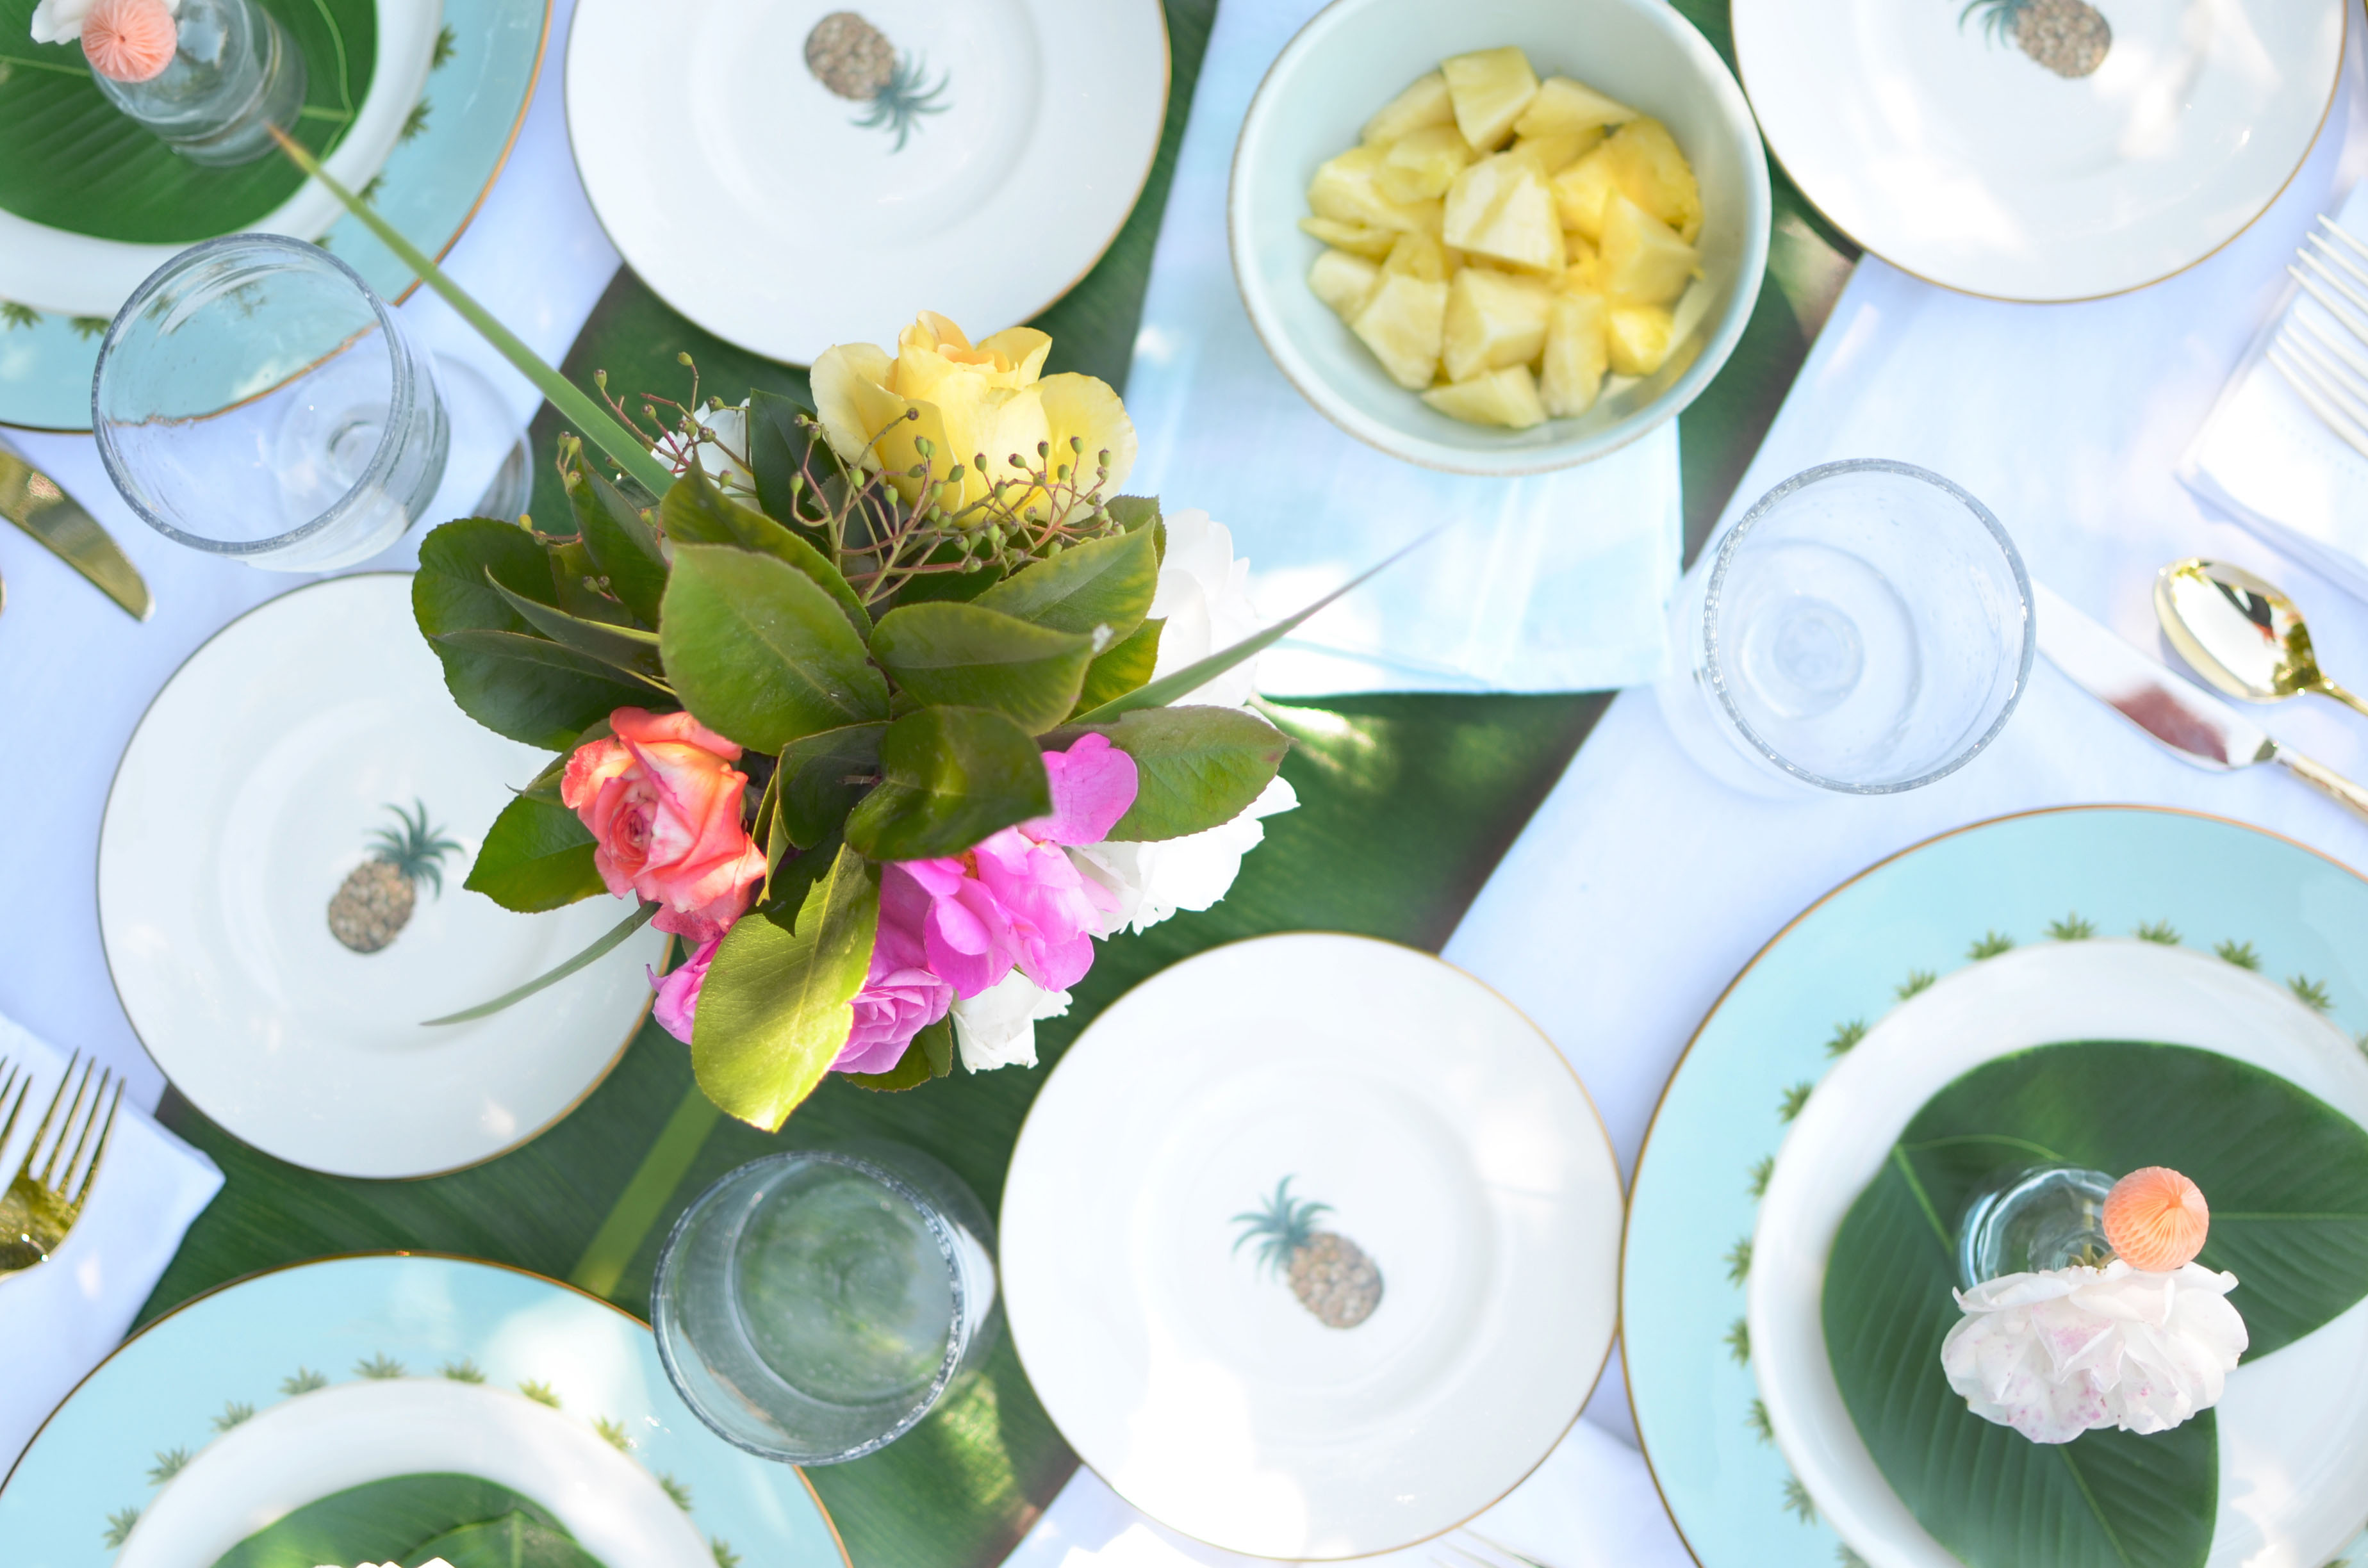 Lenox British Colonial Dinnerware and pineapple tabletop inspiration with Table + Dine